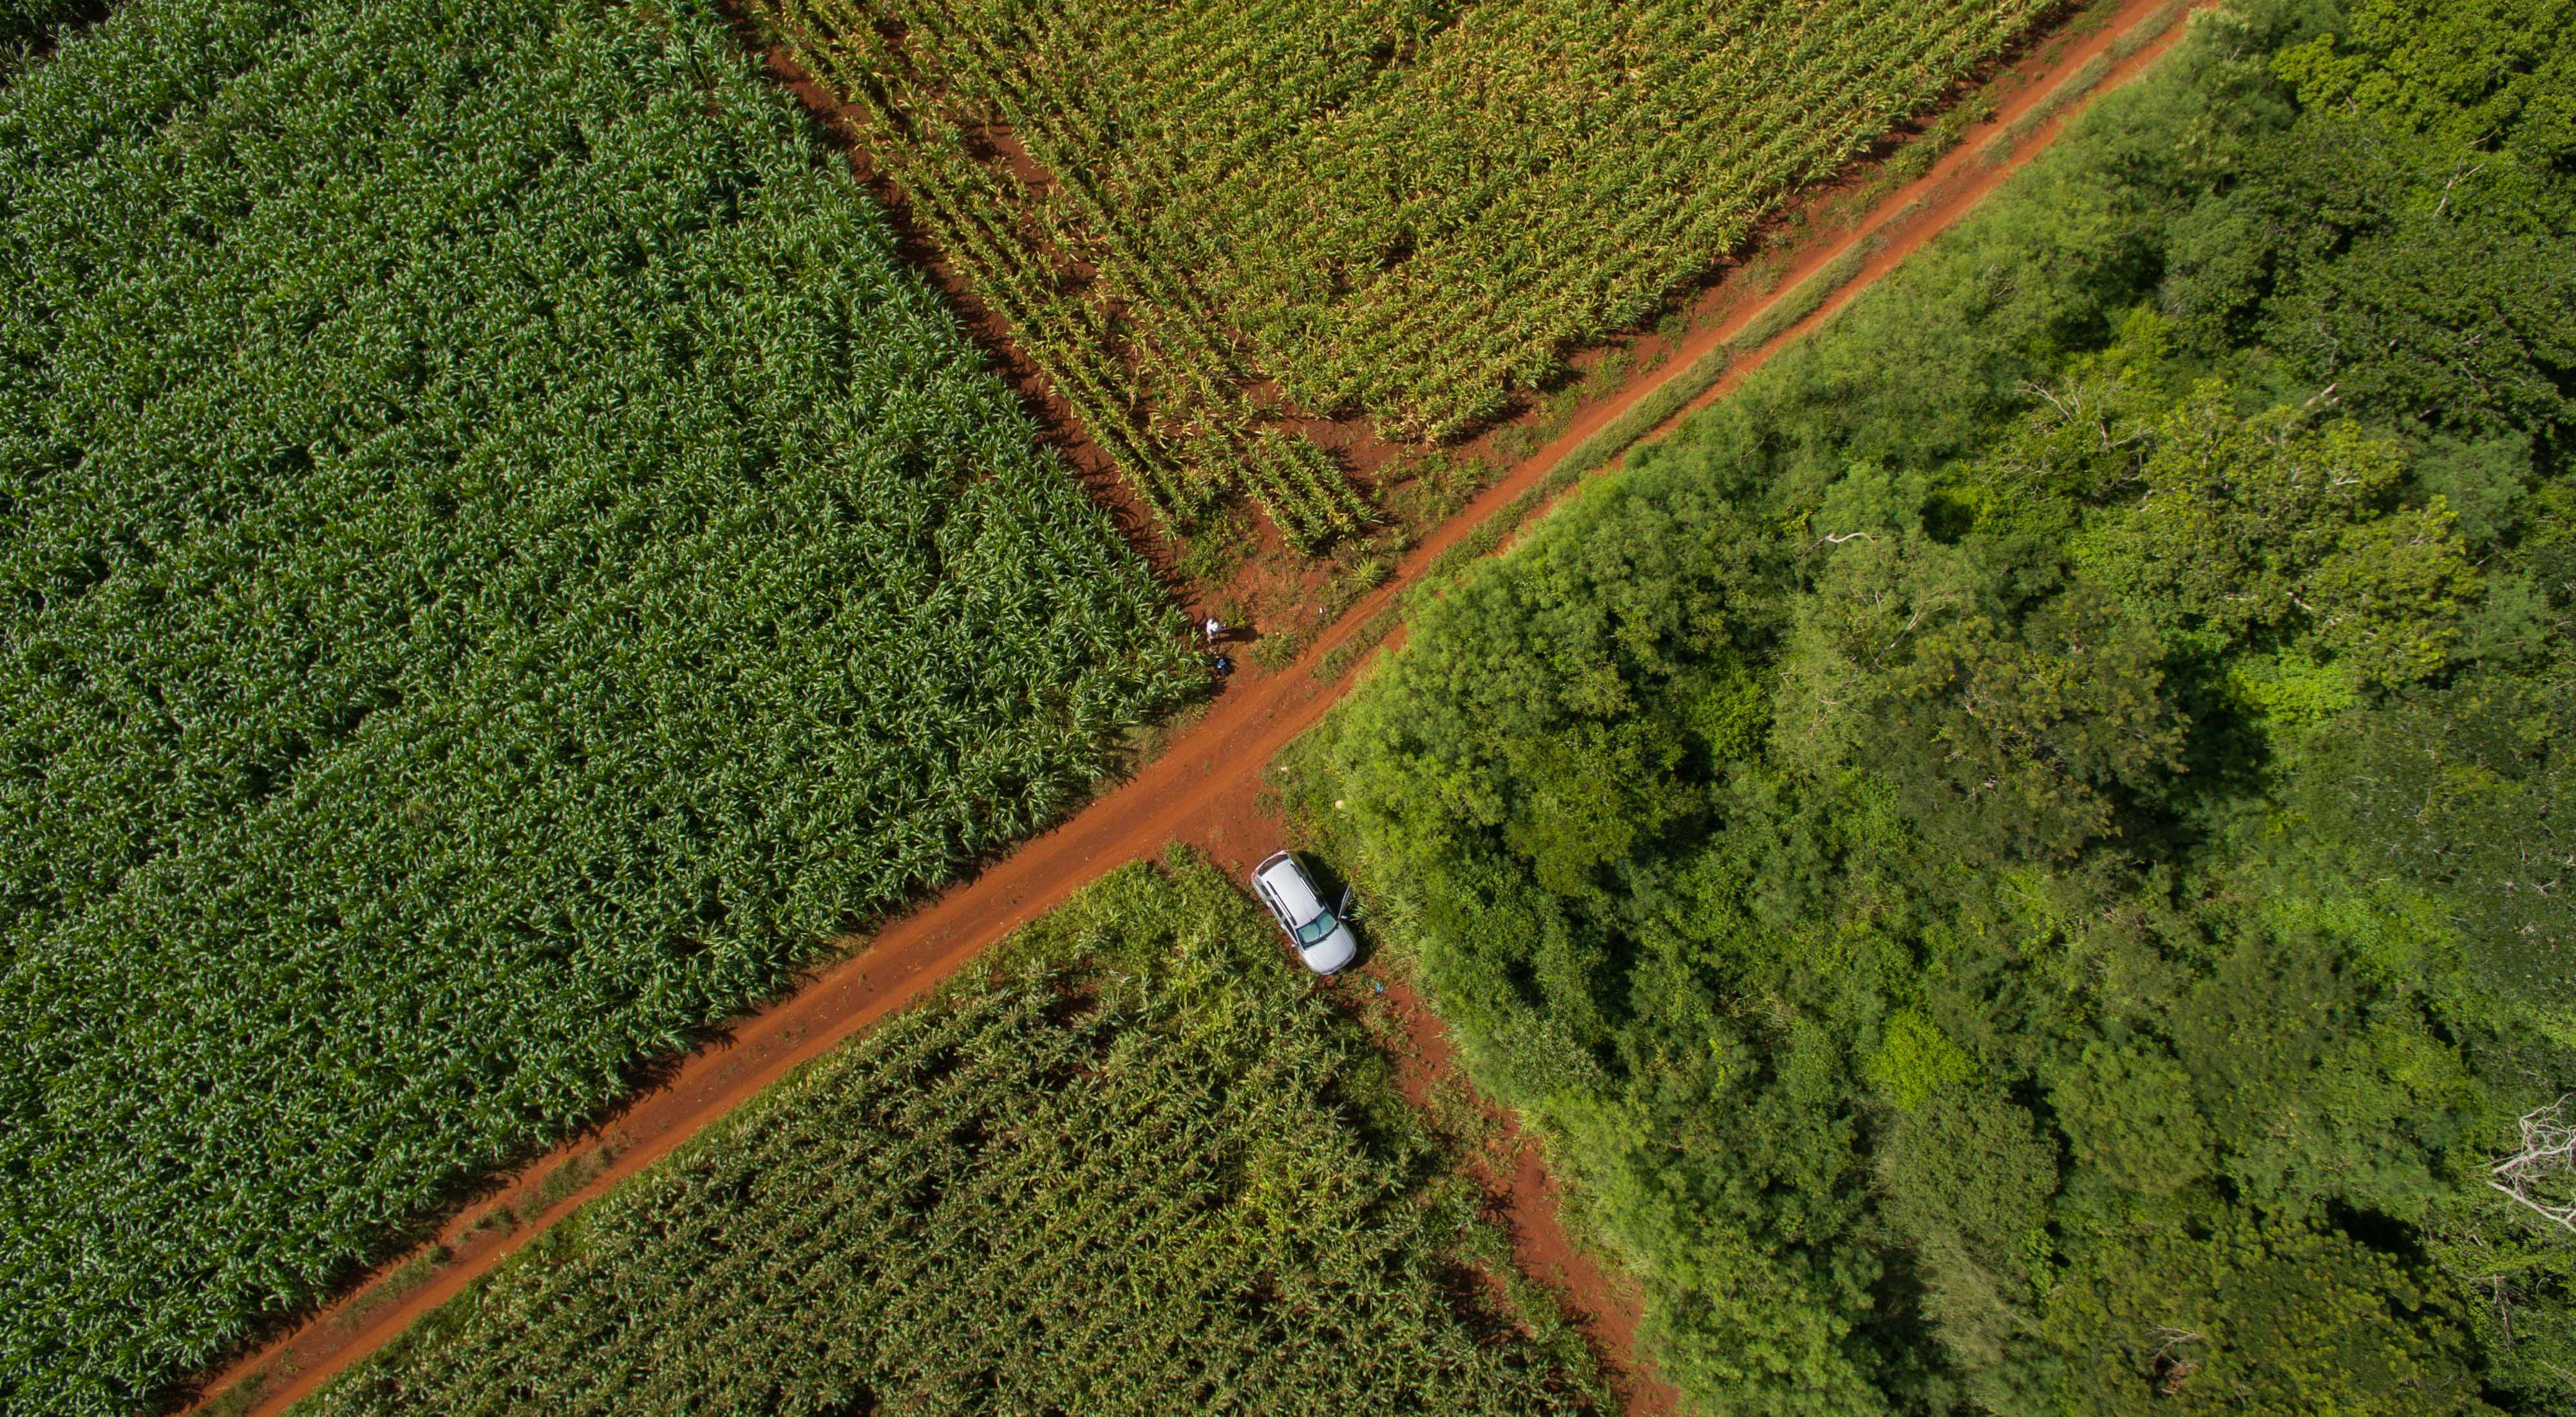 Aerial view of corn fields along the edge of the forest in the ejido of San Agustin, Yucatan, Mexico. The Nature Conservancy works with landowners, communities, and governments in Mexico to promote low-carbon rural development through the design and implementation of improved policy and practice in agriculture, ranching, and forestry. The Conservancy is leading the initiative, Mexico REDD+ Program in conjunction with the Rainforest Alliance, the Woods Hole Research Center, and Espacios Naturales y Desarrollo Sustentable. 